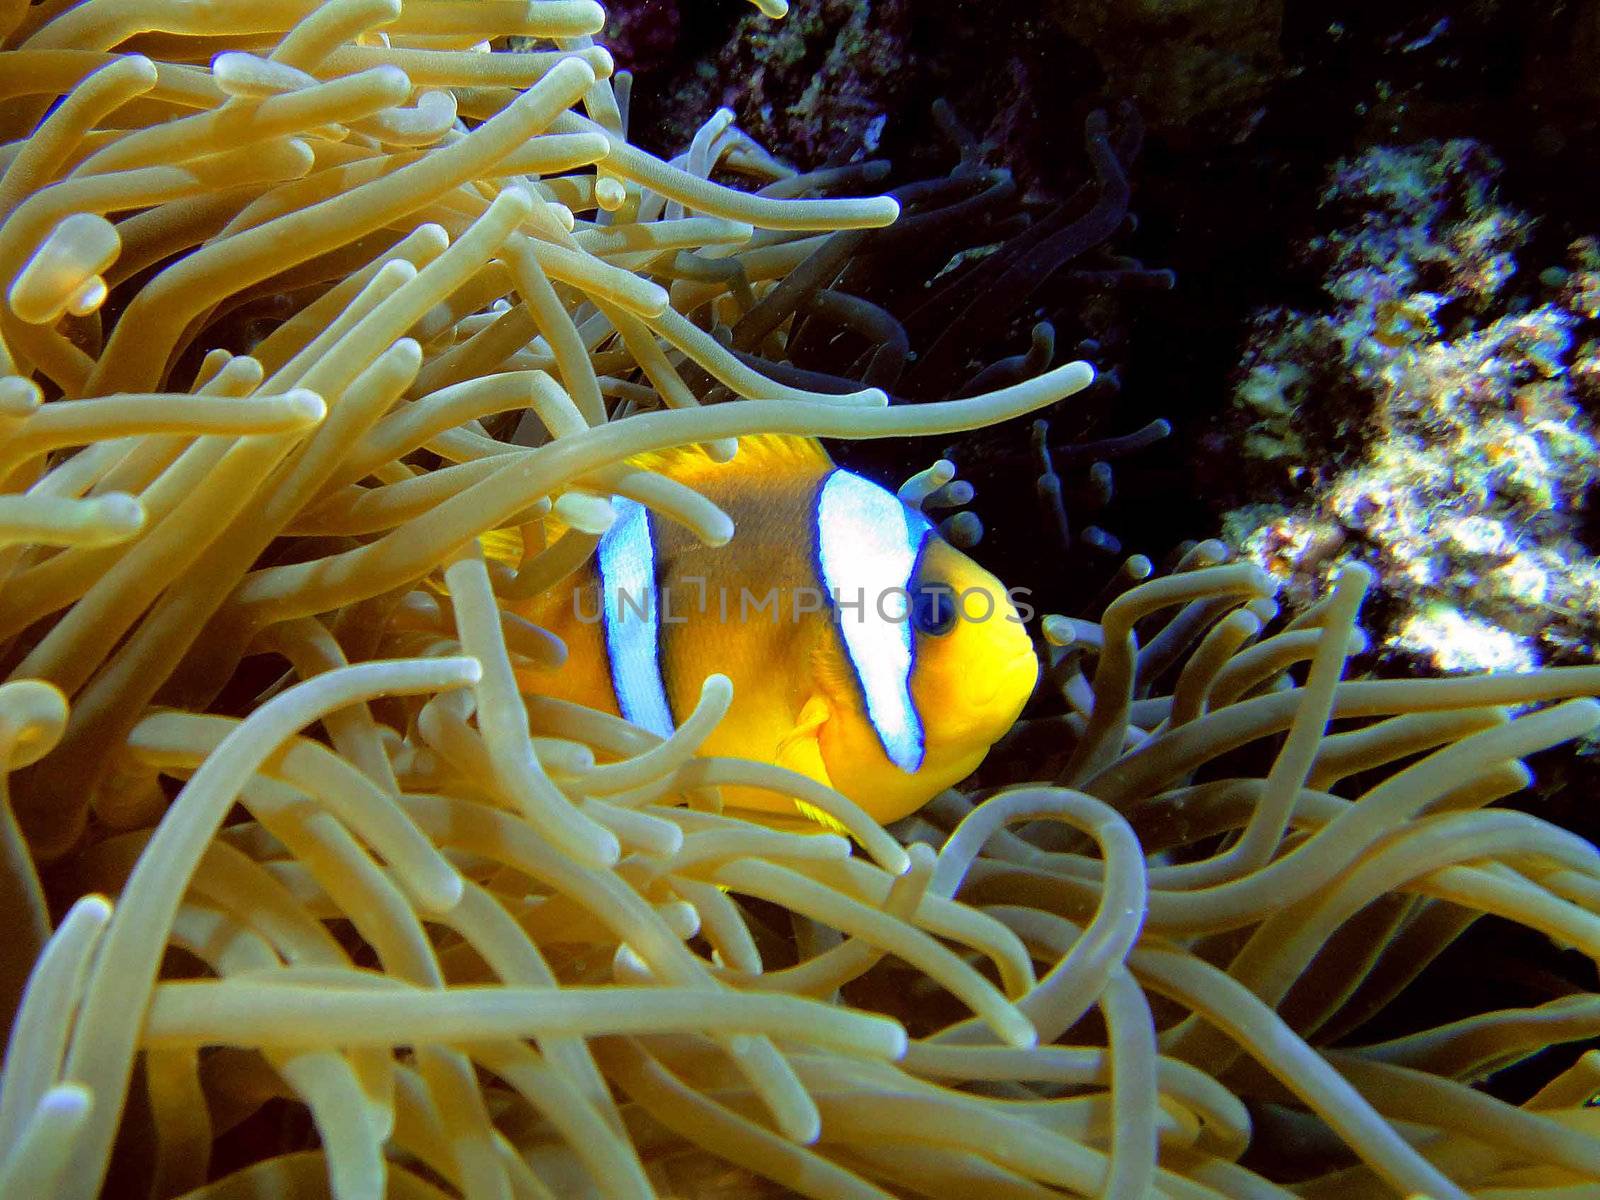 Amphiprion and his anemone 2 by georg777